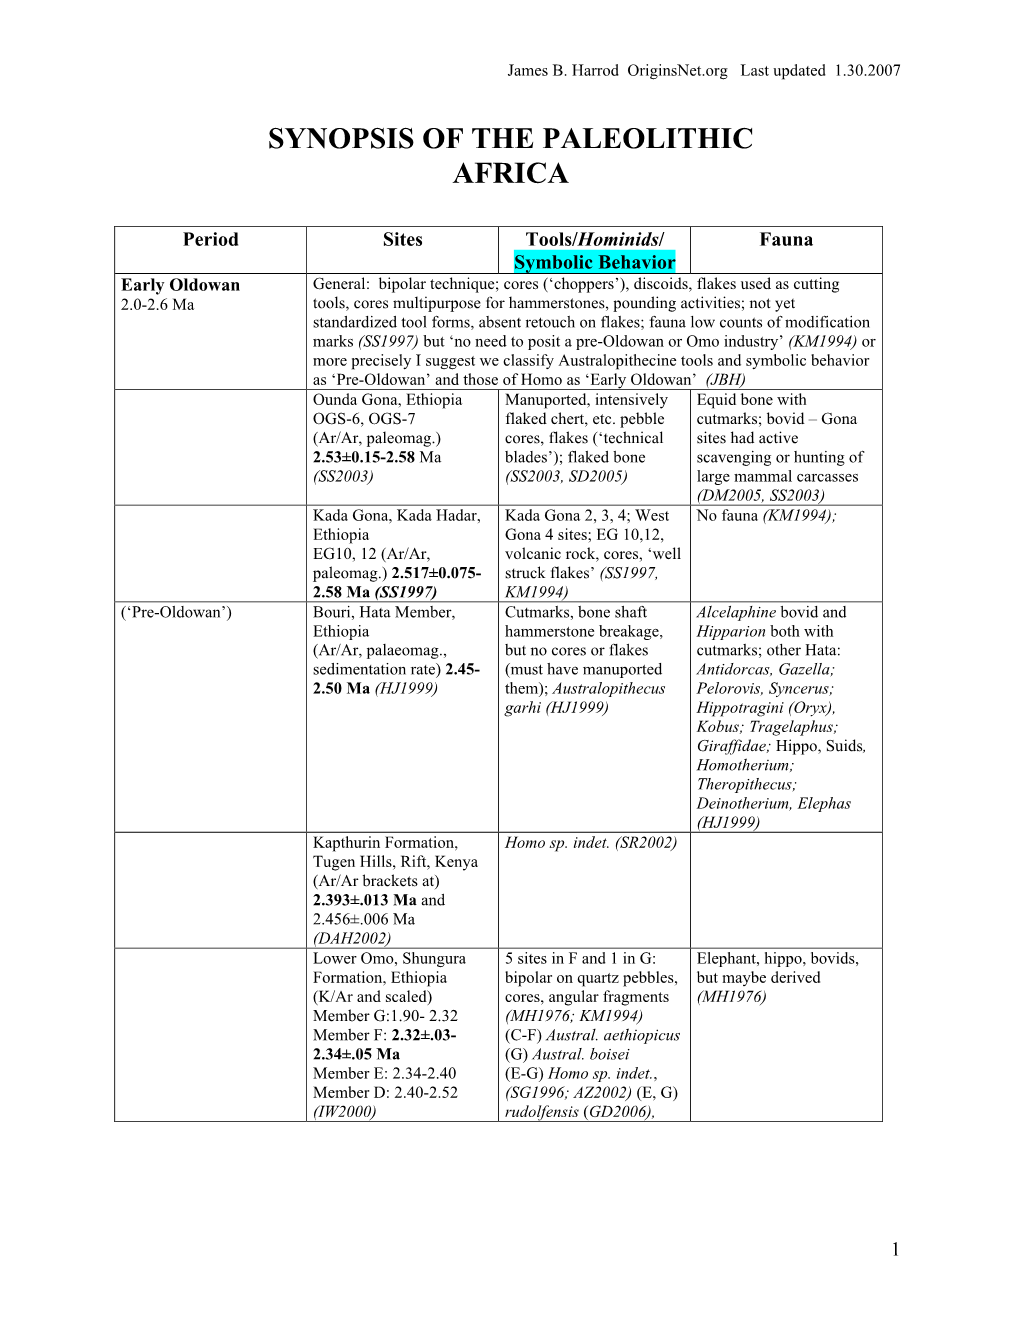 Synopsis of Paleo Africa